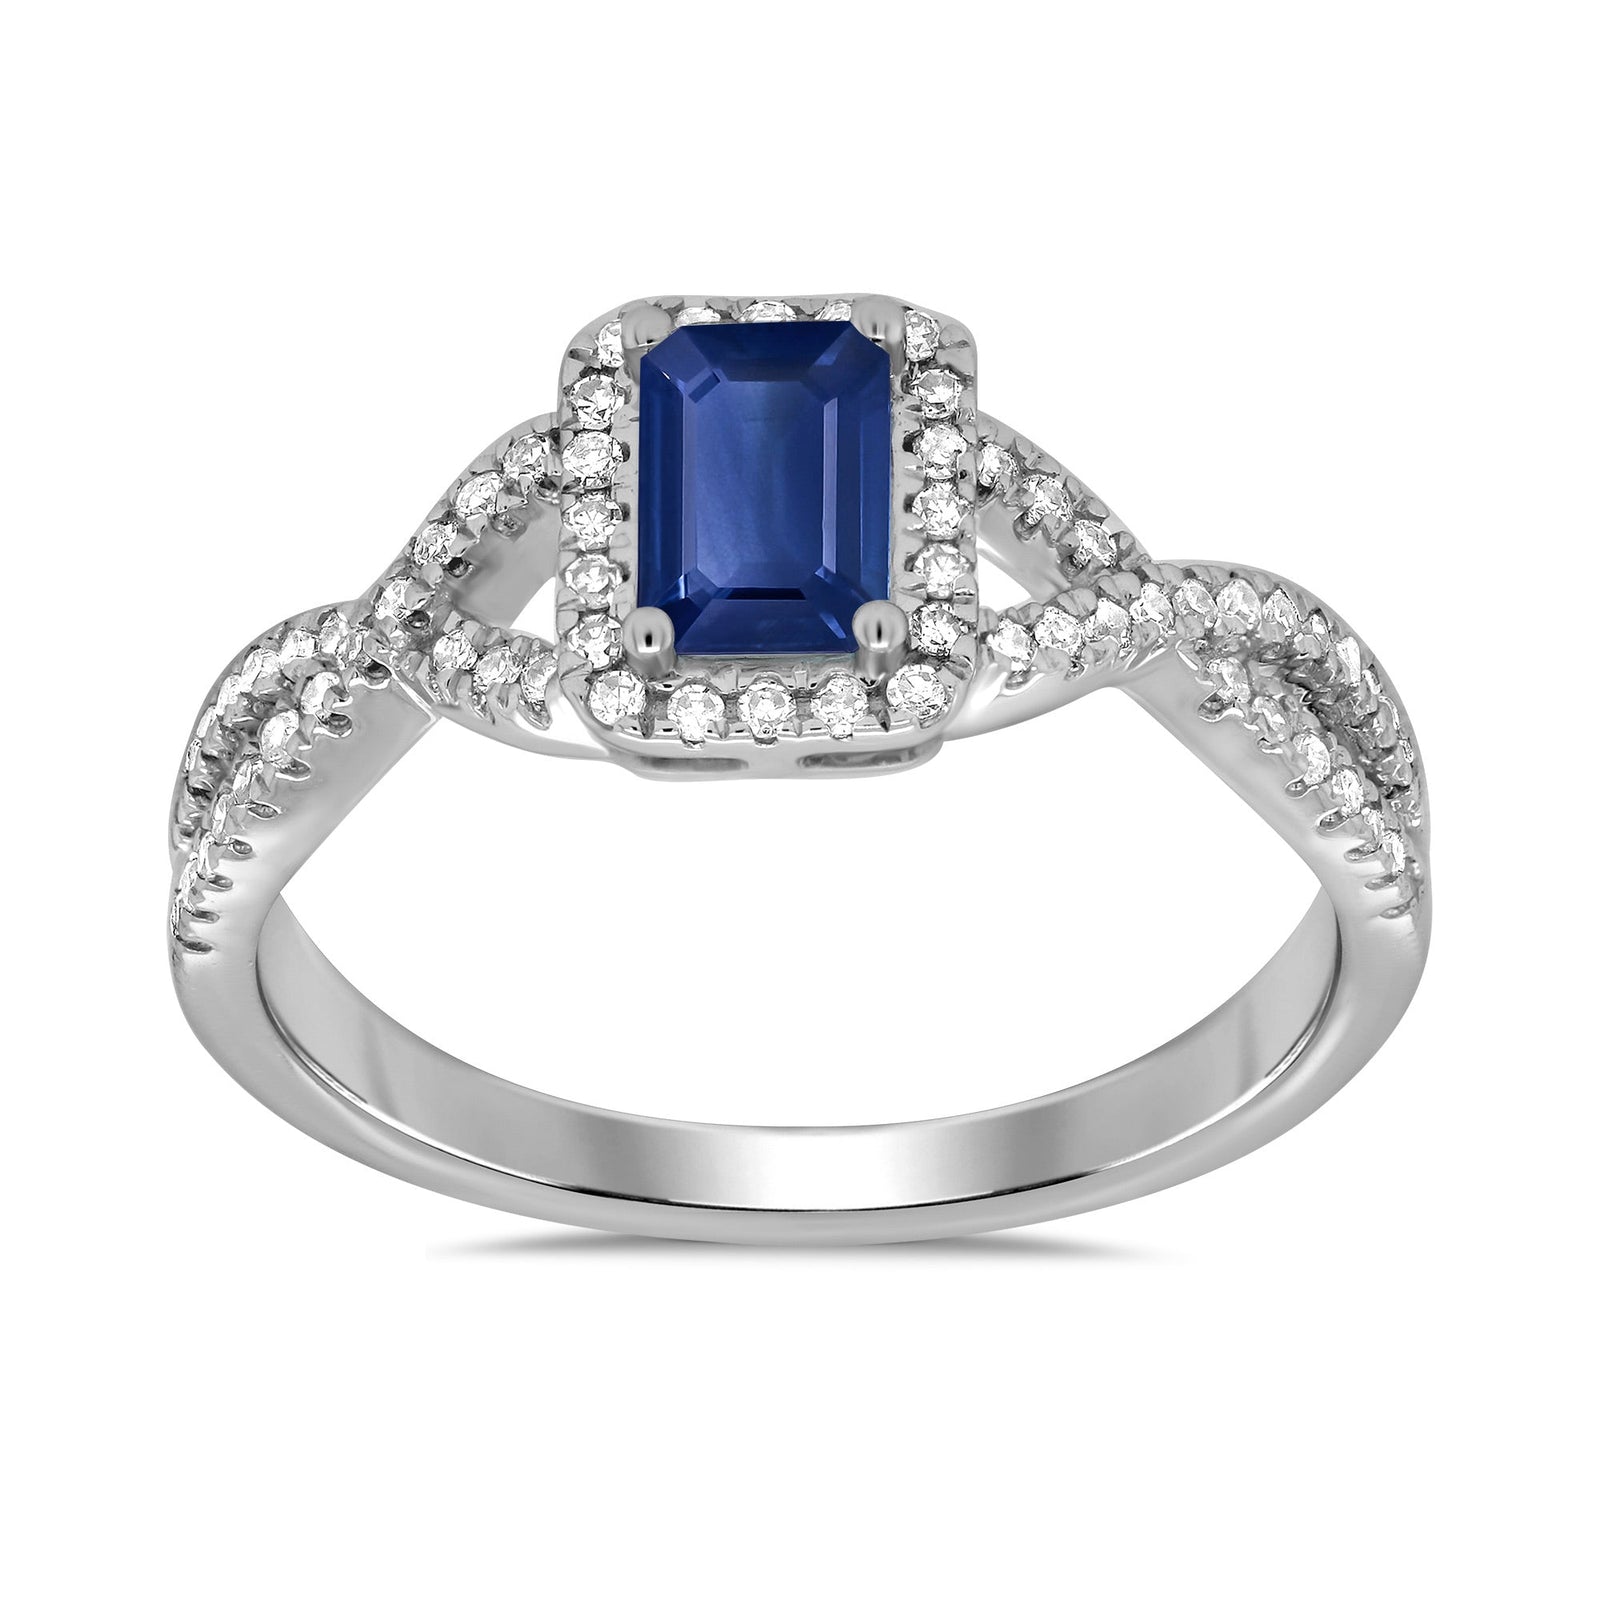 9ct white gold 6x4mm octagon sapphire & diamond cluster ring with diamond set crossover shoulders 0.21ct